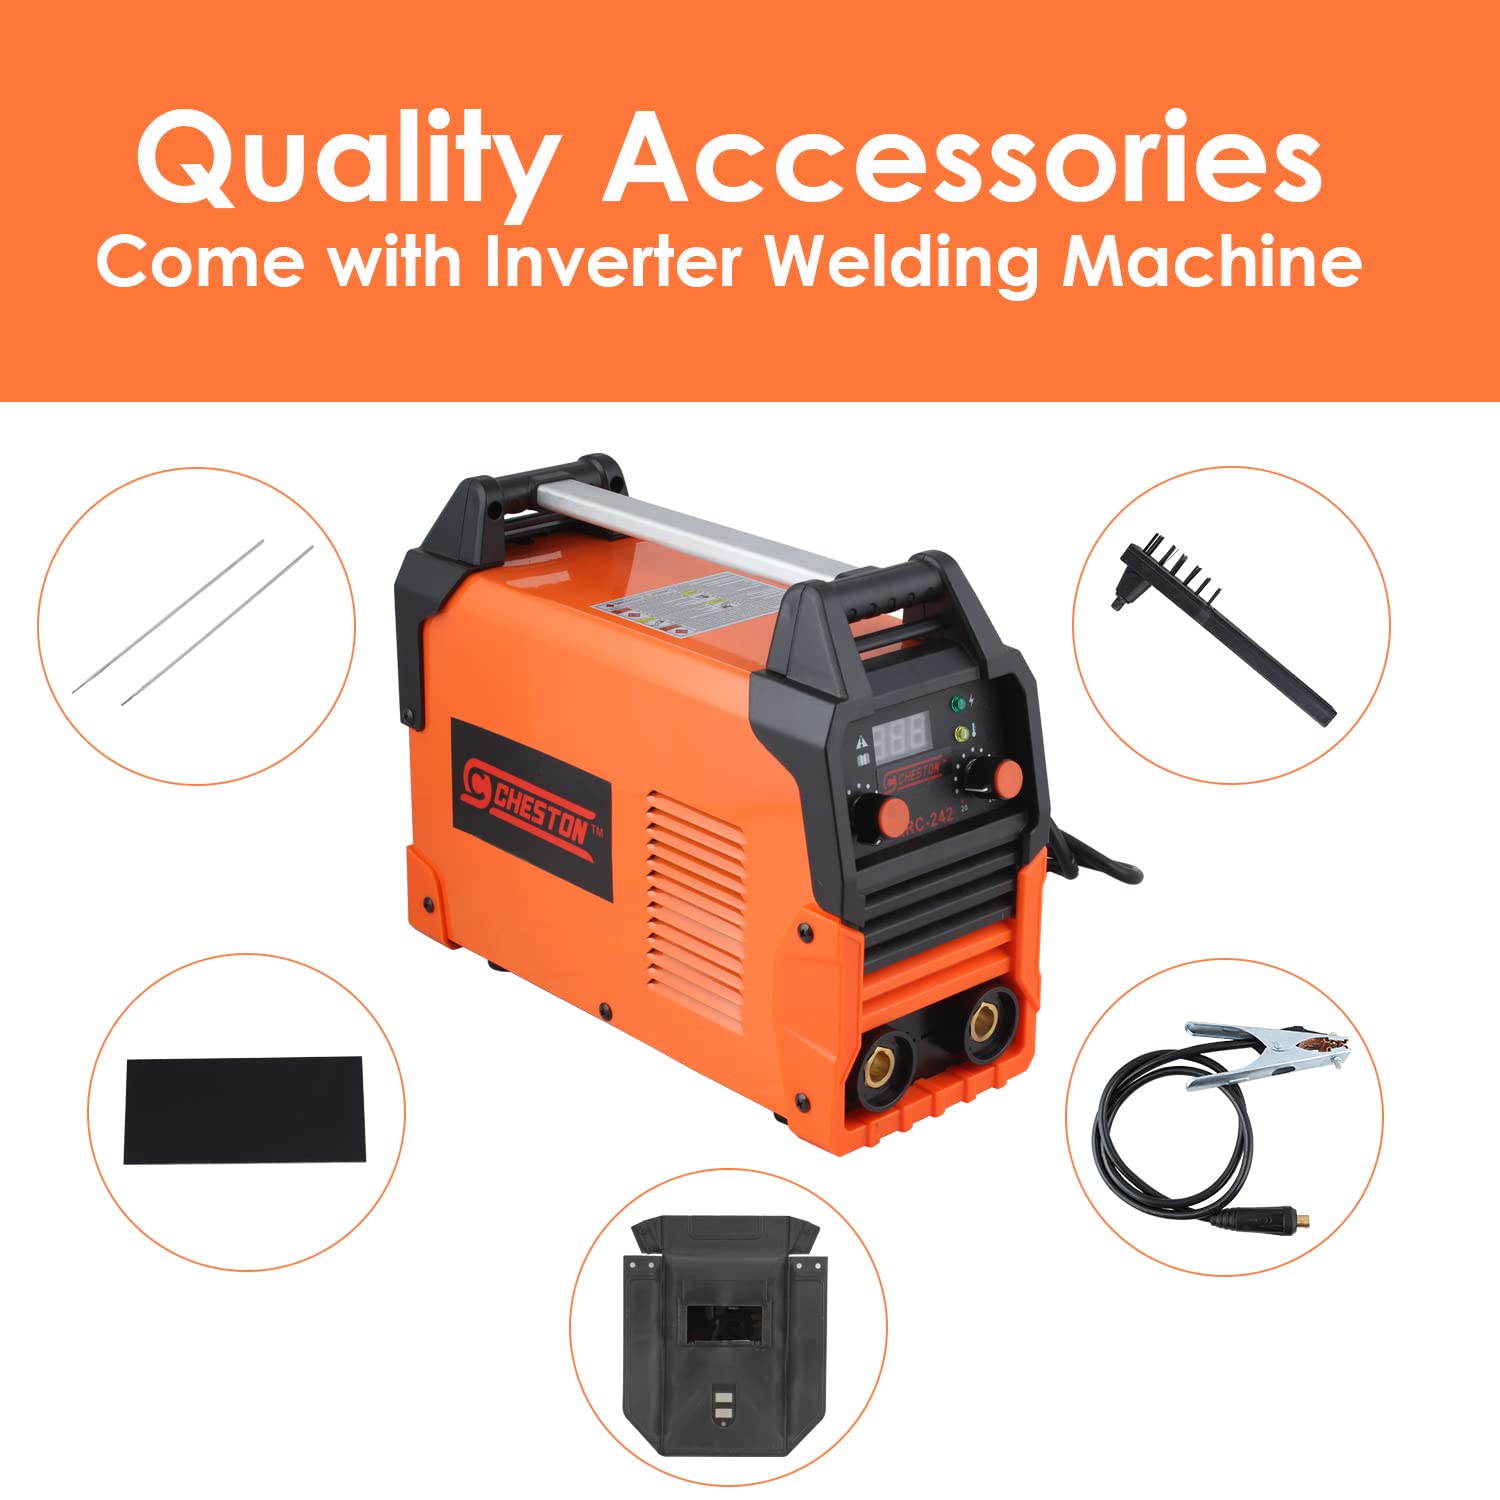 Cheston Inverter ARC Welding Machine (IGBT) 242A with Hot Start, Anti-Stick Functions, Arc Force Control with All Accessories (242A)